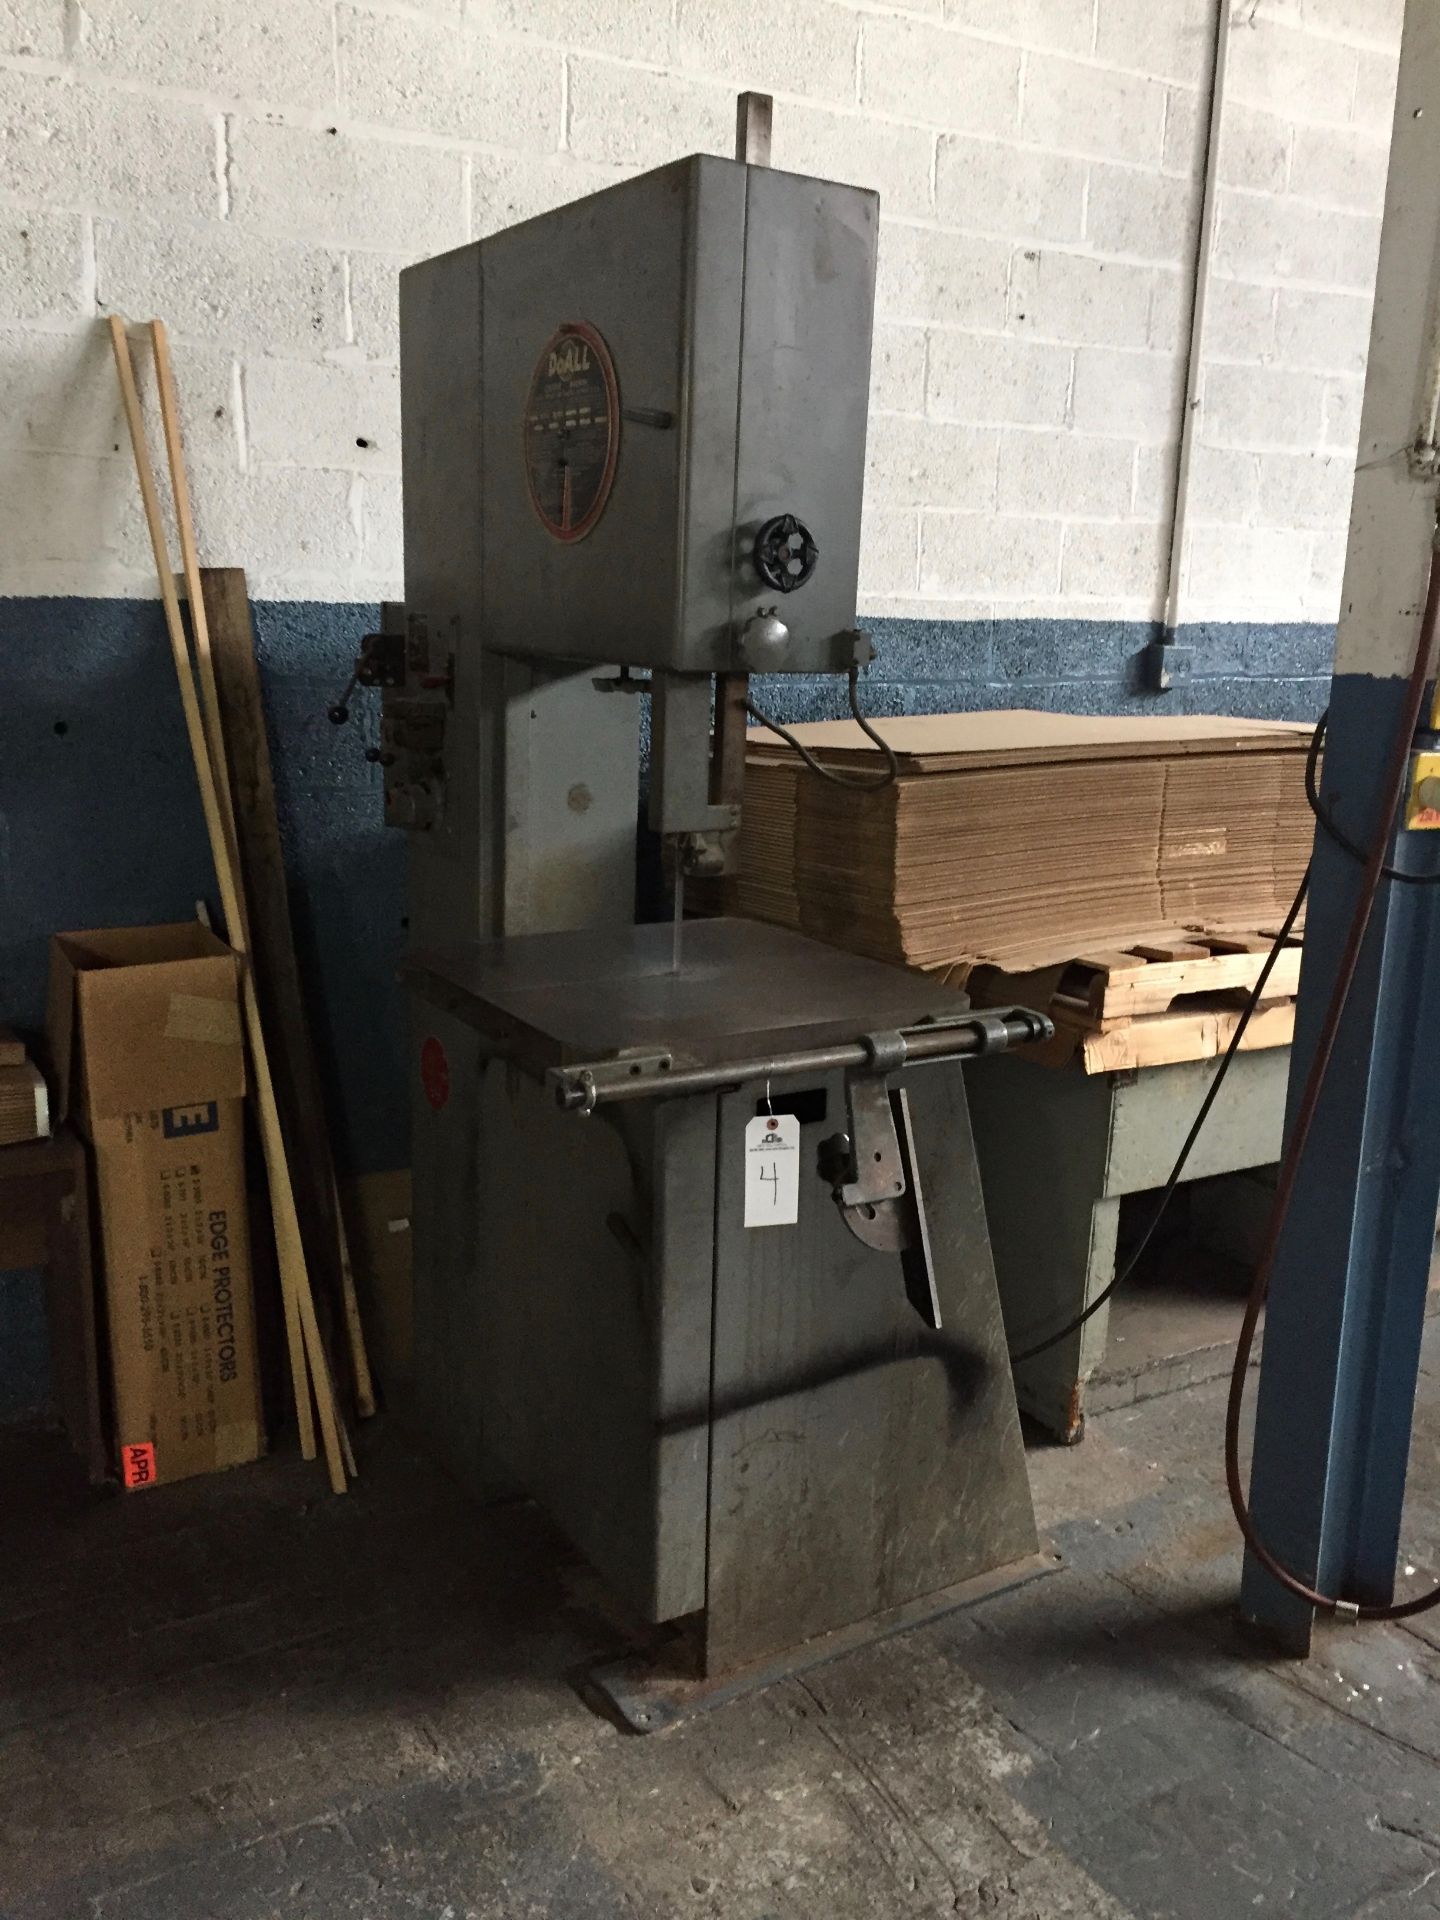 Do-All Model 2013-0 Band Saw, Max Band Length 154in, 220V, S/N: 321-731 | Rigging/Loading Fee: $200